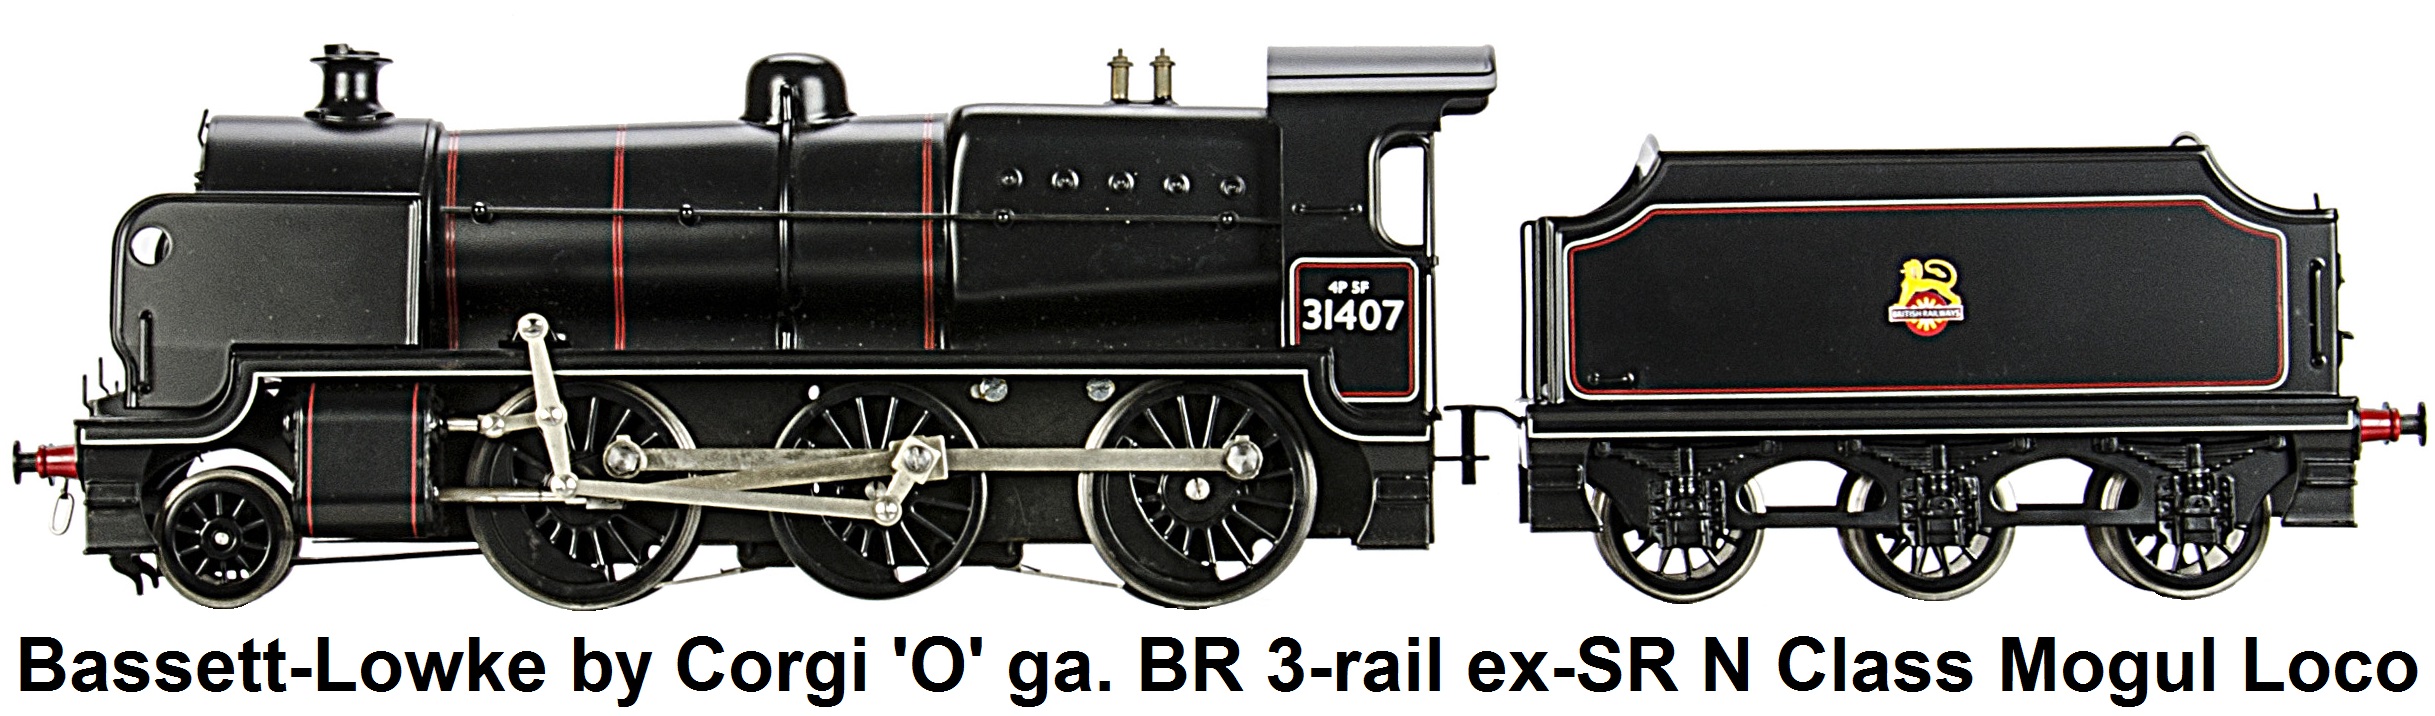 Bassett-Lowke by Corgi 'O' gauge 3-rail electric ex-Southern Railway N class 2-6-0 Mogul Locomotive and Tender, finished in British Rail lined black as #31407 with early crest